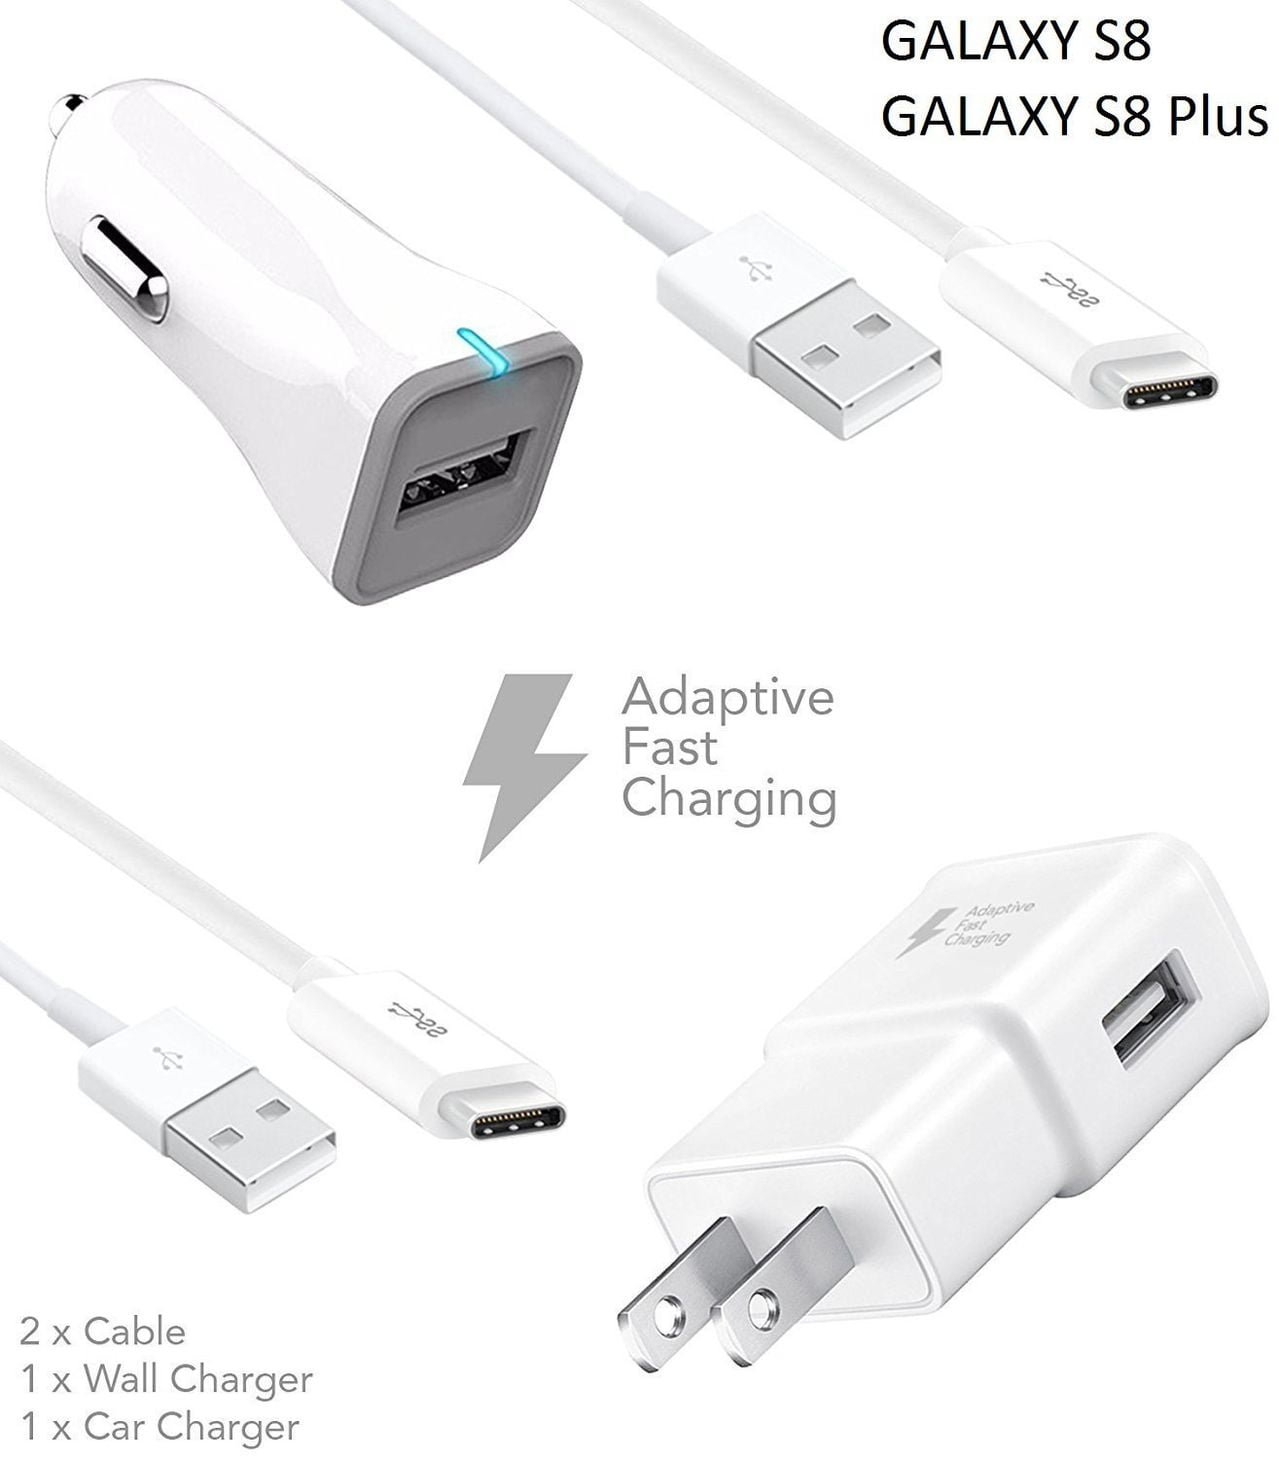 knuffel Canberra vrijheid Samsung Galaxy S8 / S8 Edge Charger! Adaptive Fast Charger Type-C Cable  {Wall Charger + Car Charger + 2 Cables} True Digital Adaptive Fast Charging  uses dual voltages for up to 50%